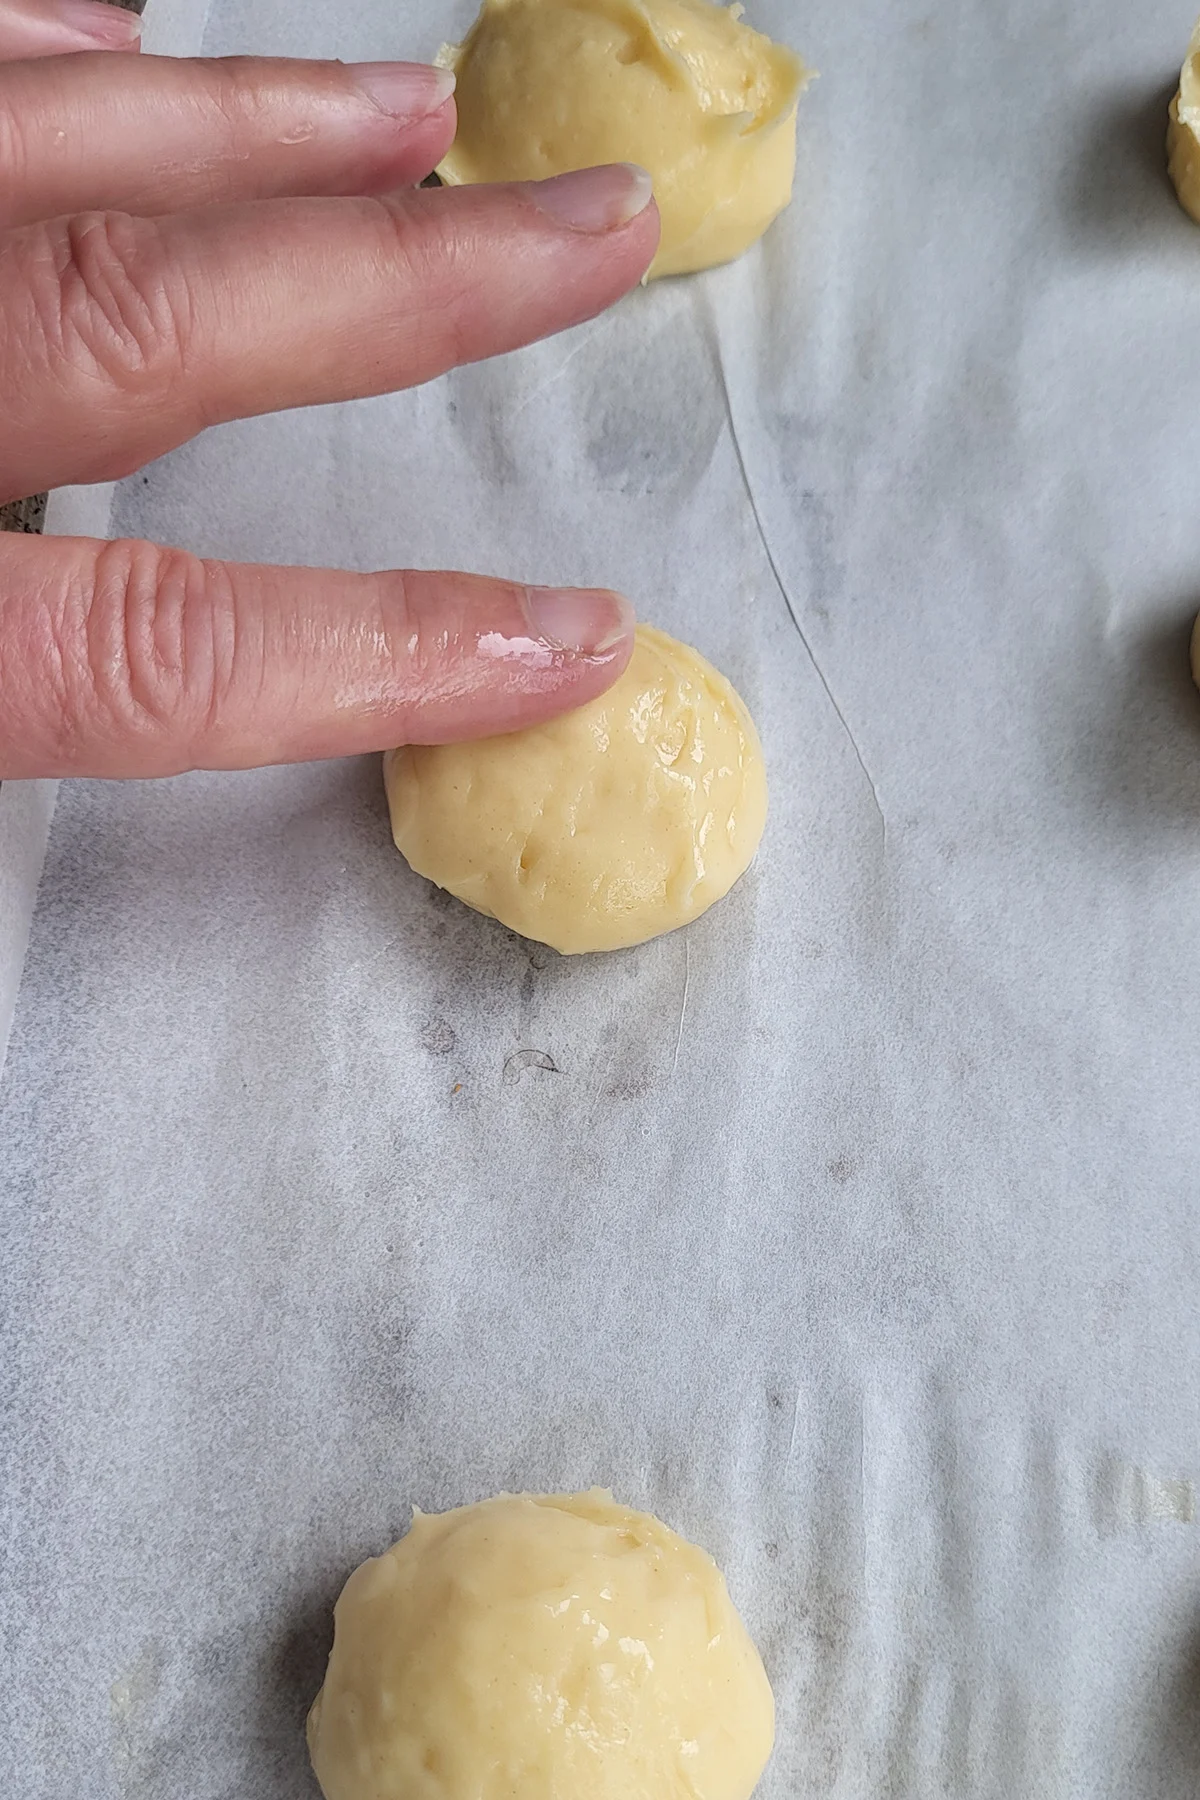 a finger smoothing the top of an unbaked cream puff.